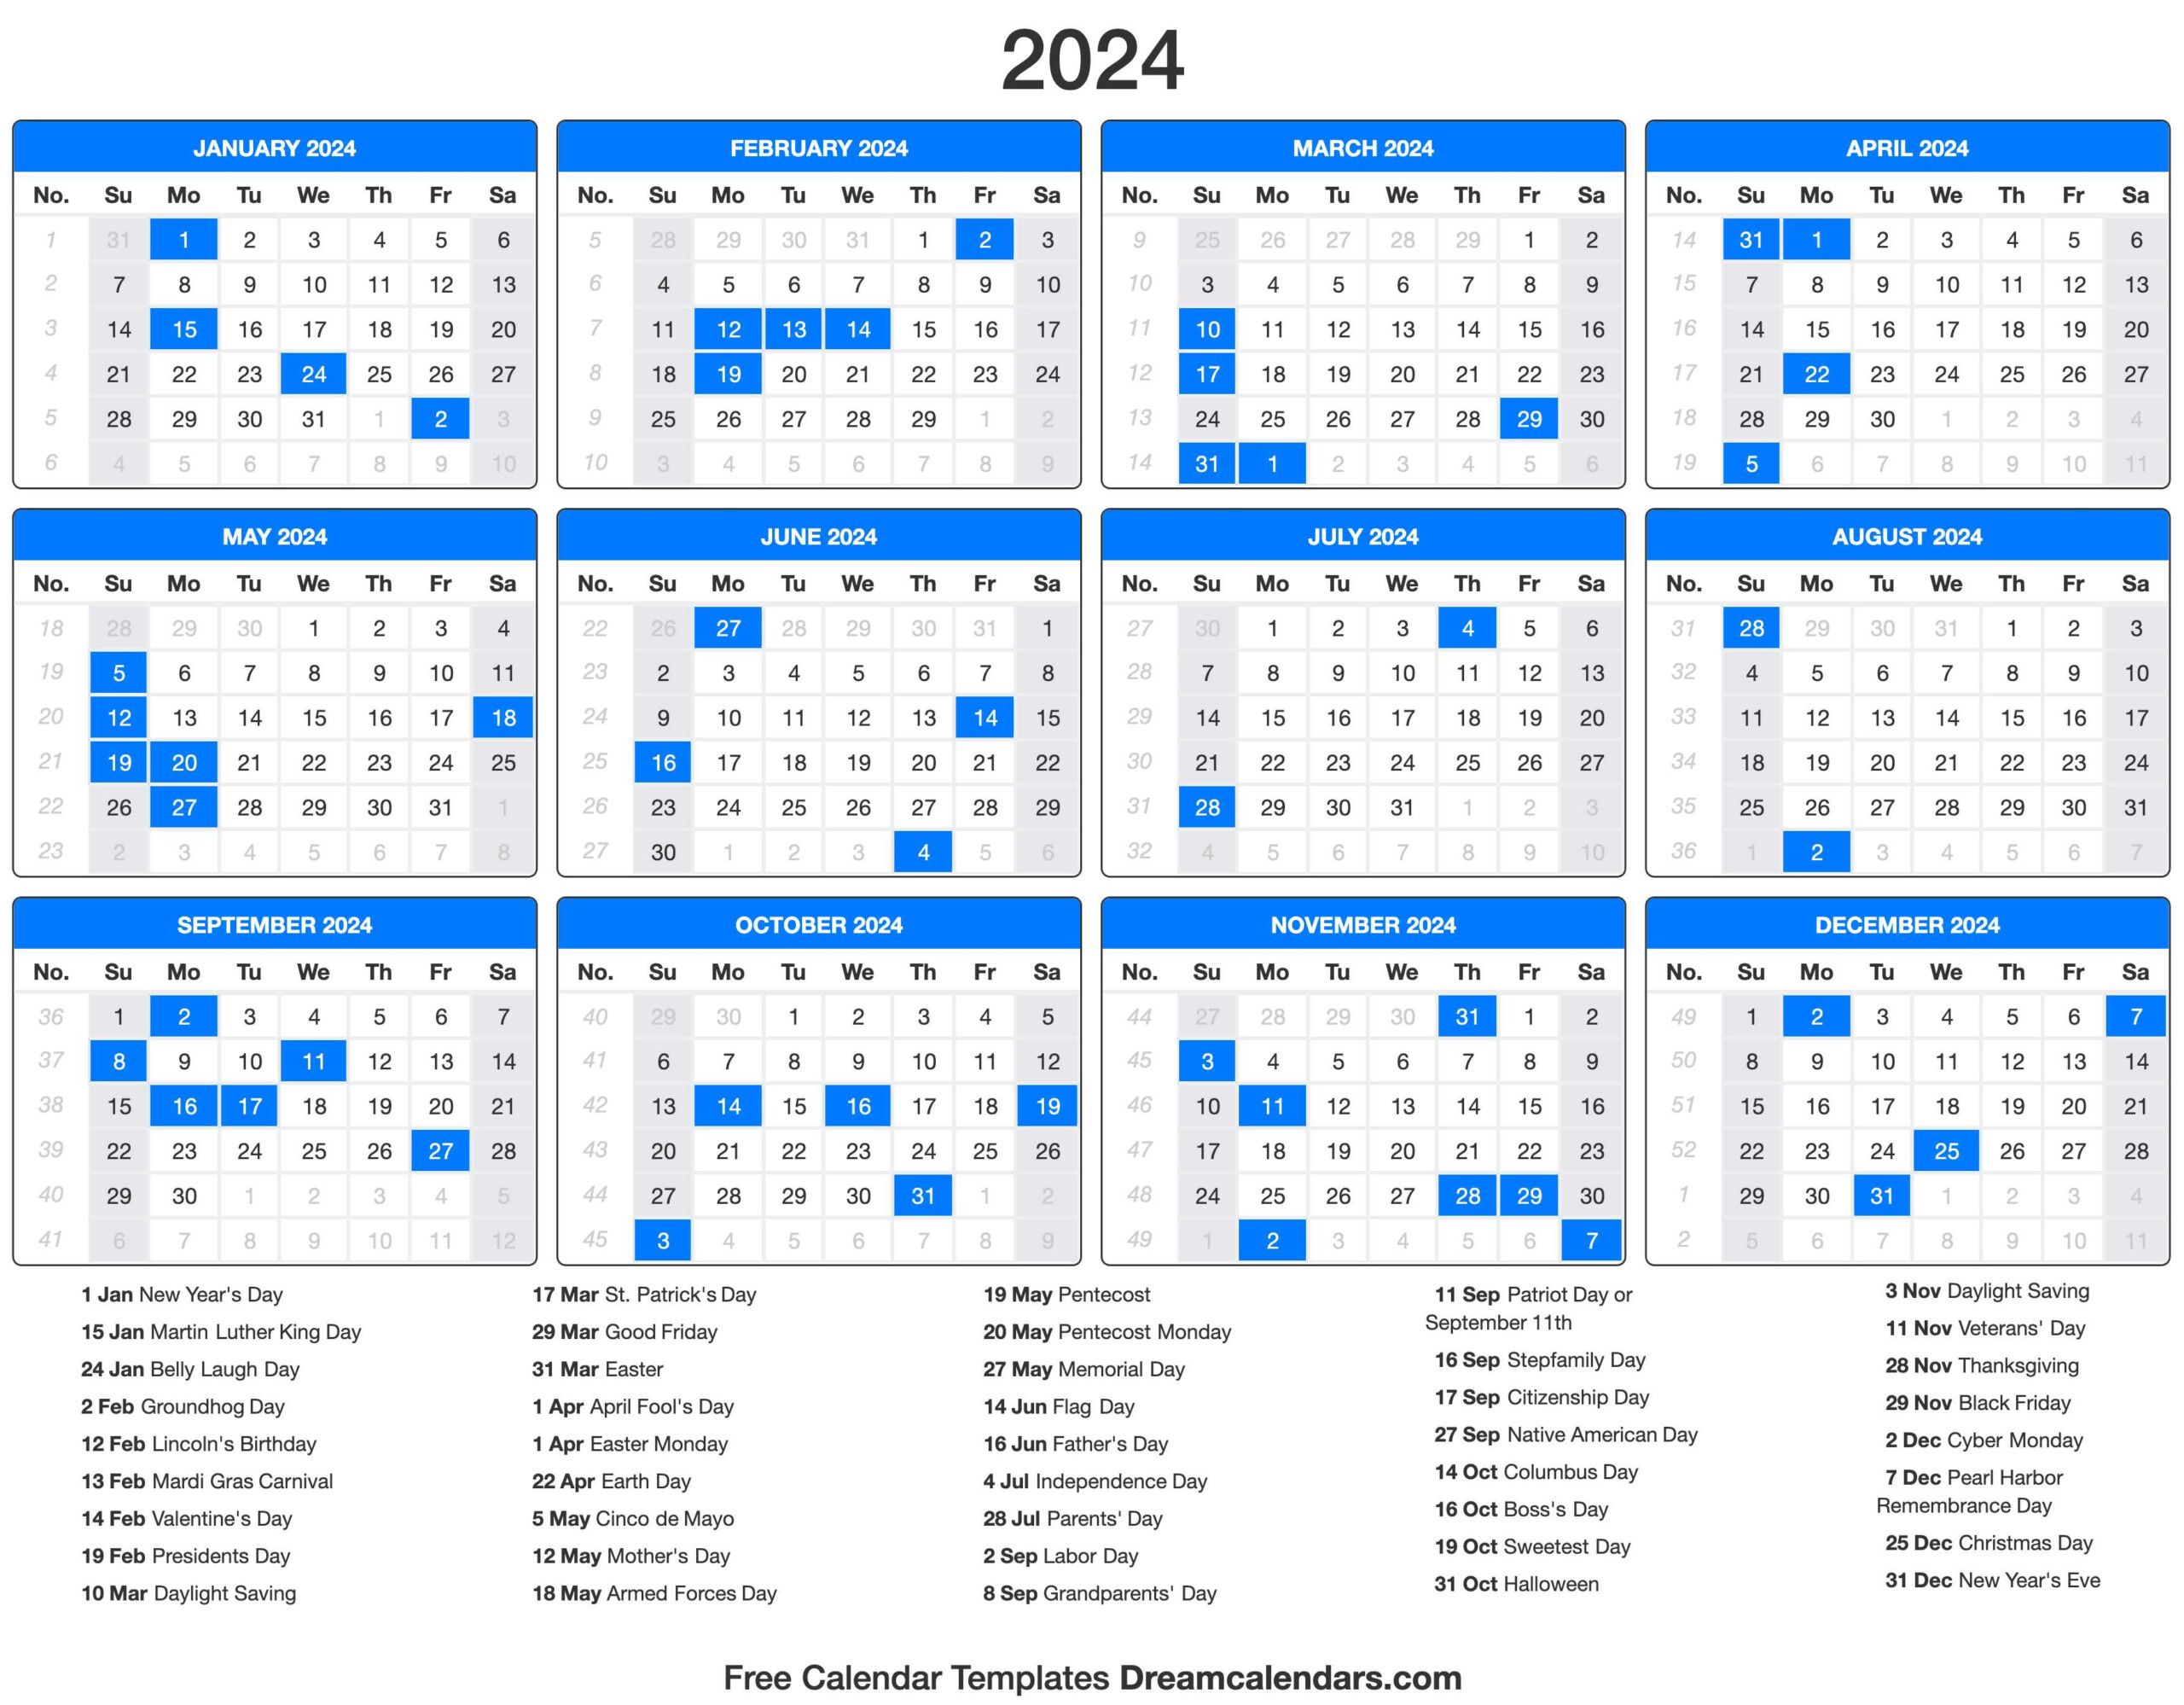 Calendar With Event Days For 2024 And 2024 Theo Silvie